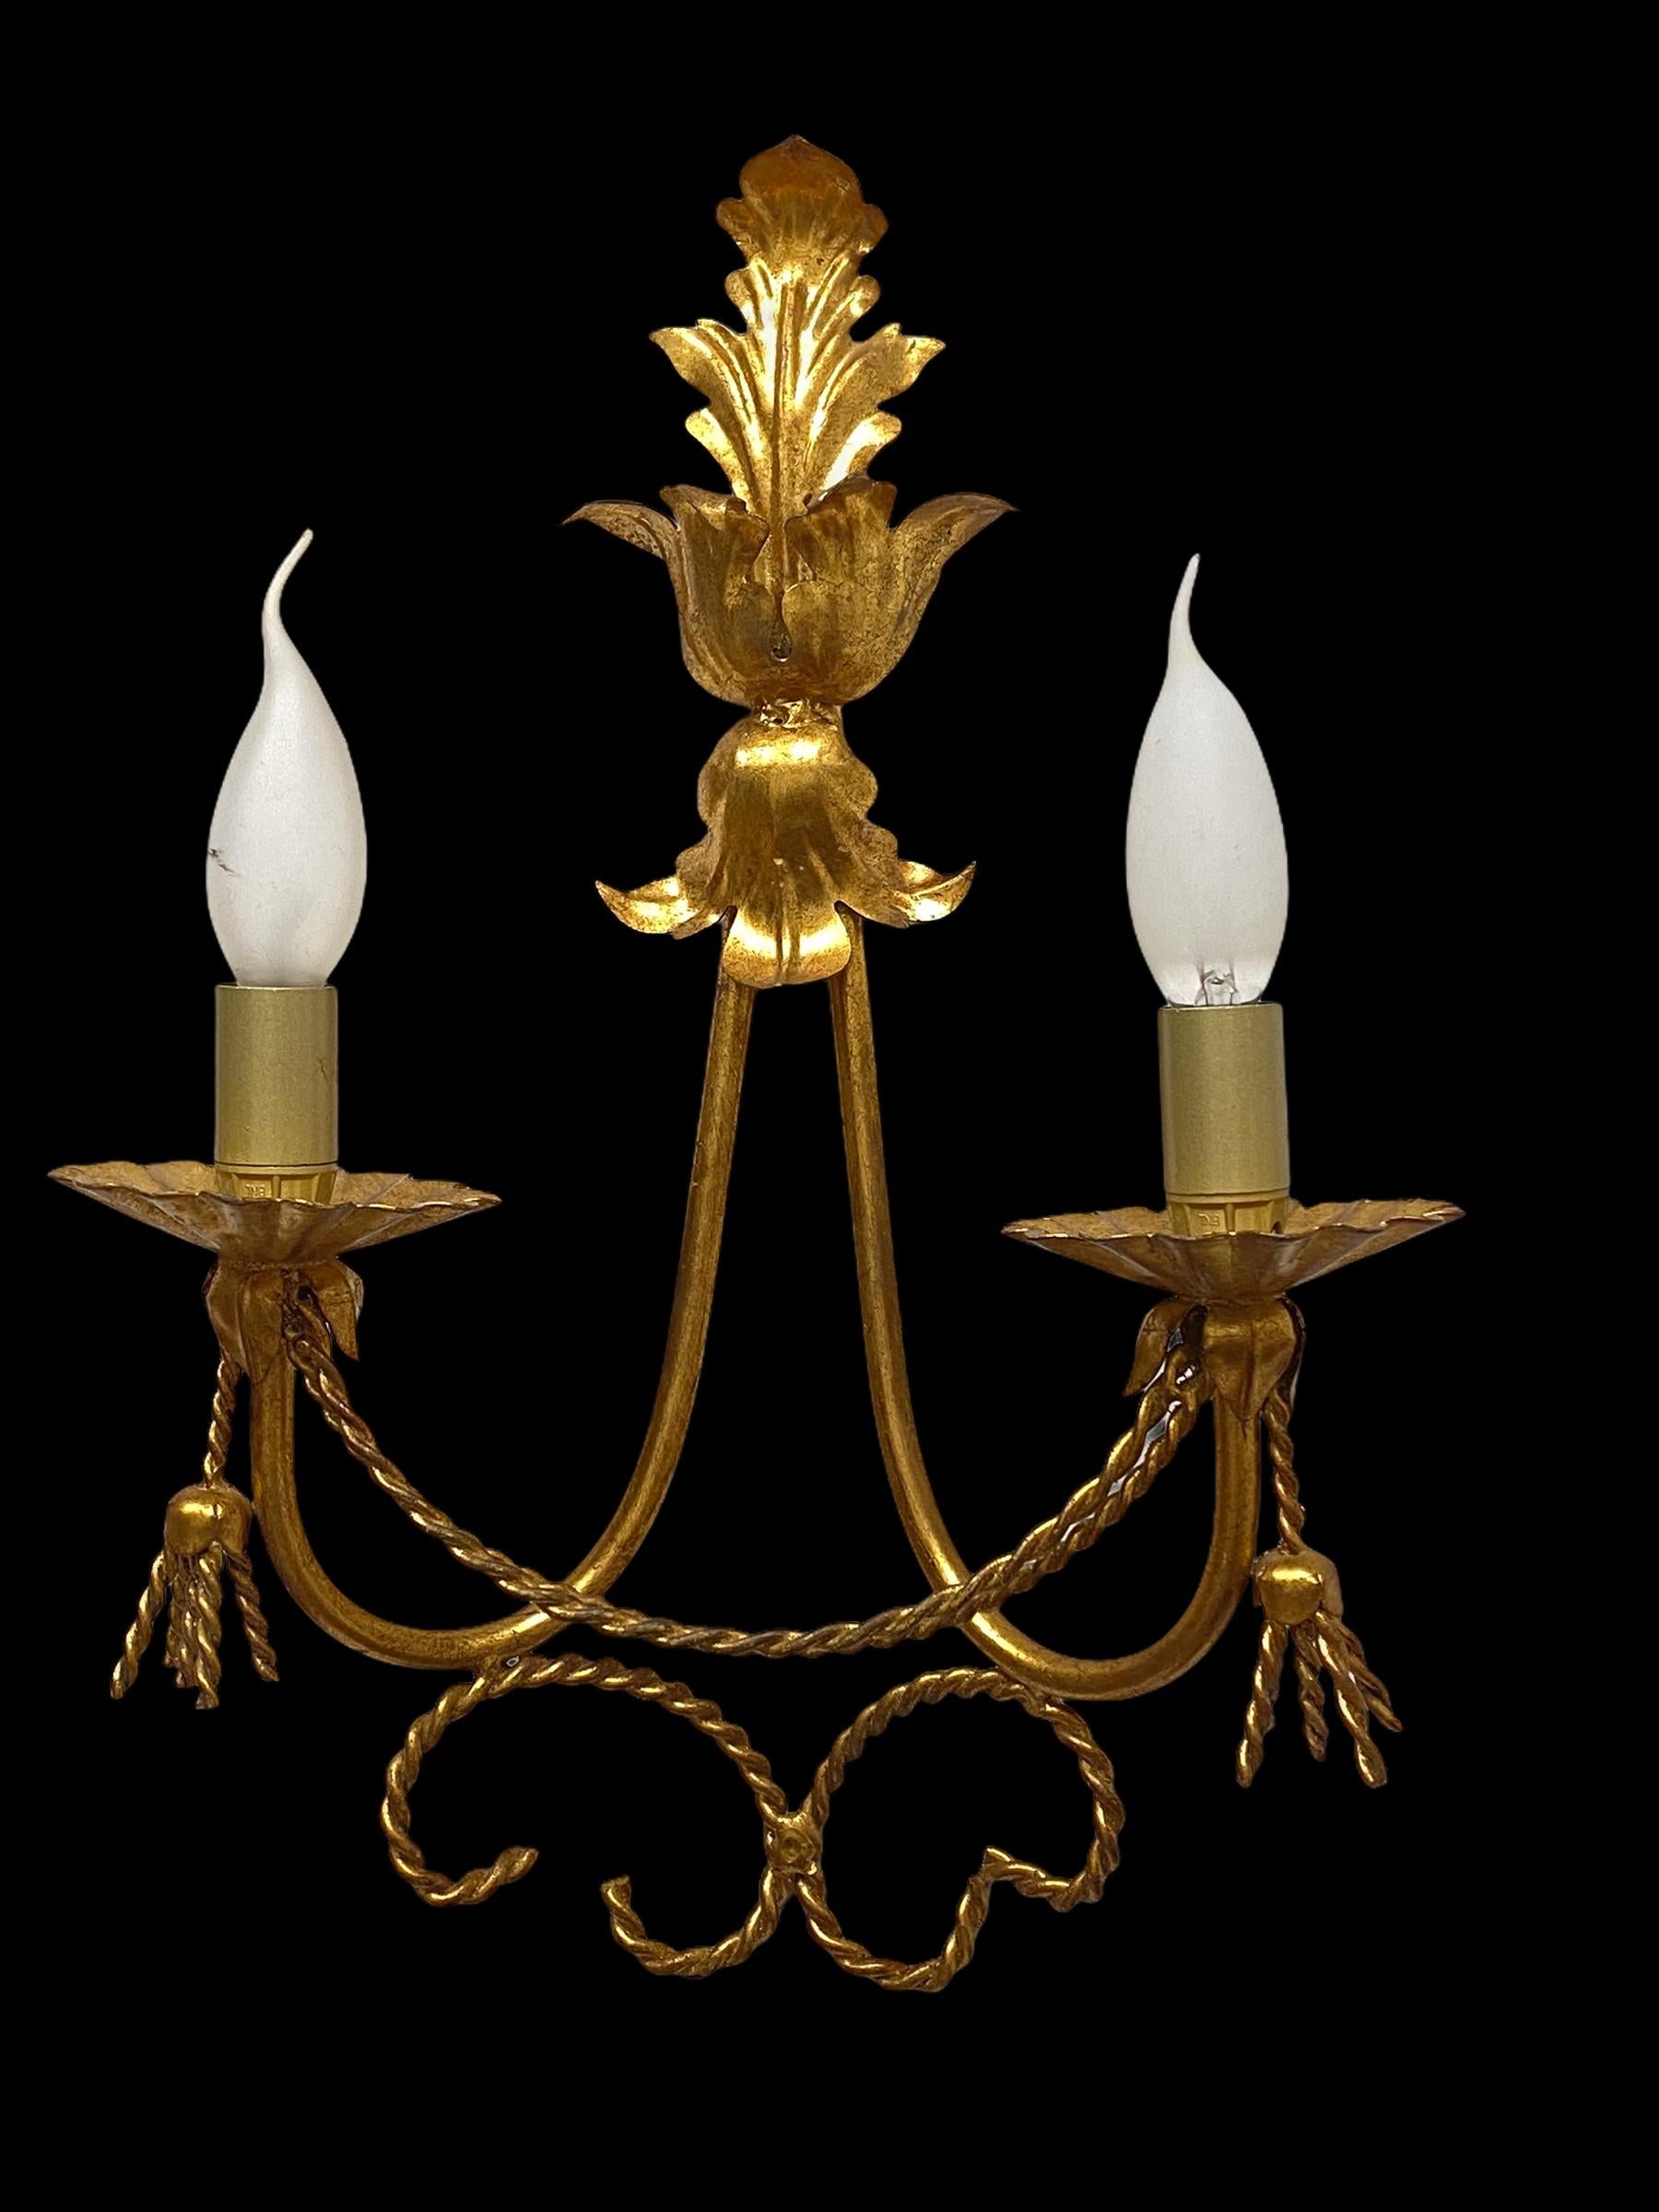 A single metal gilded sconce. The fixture requires two European E14 candelabra bulbs, each bulb up to 40 watts. The wall light has a beautiful color and gives each room an eclectic statement. Light bulbs are not included in this offer.